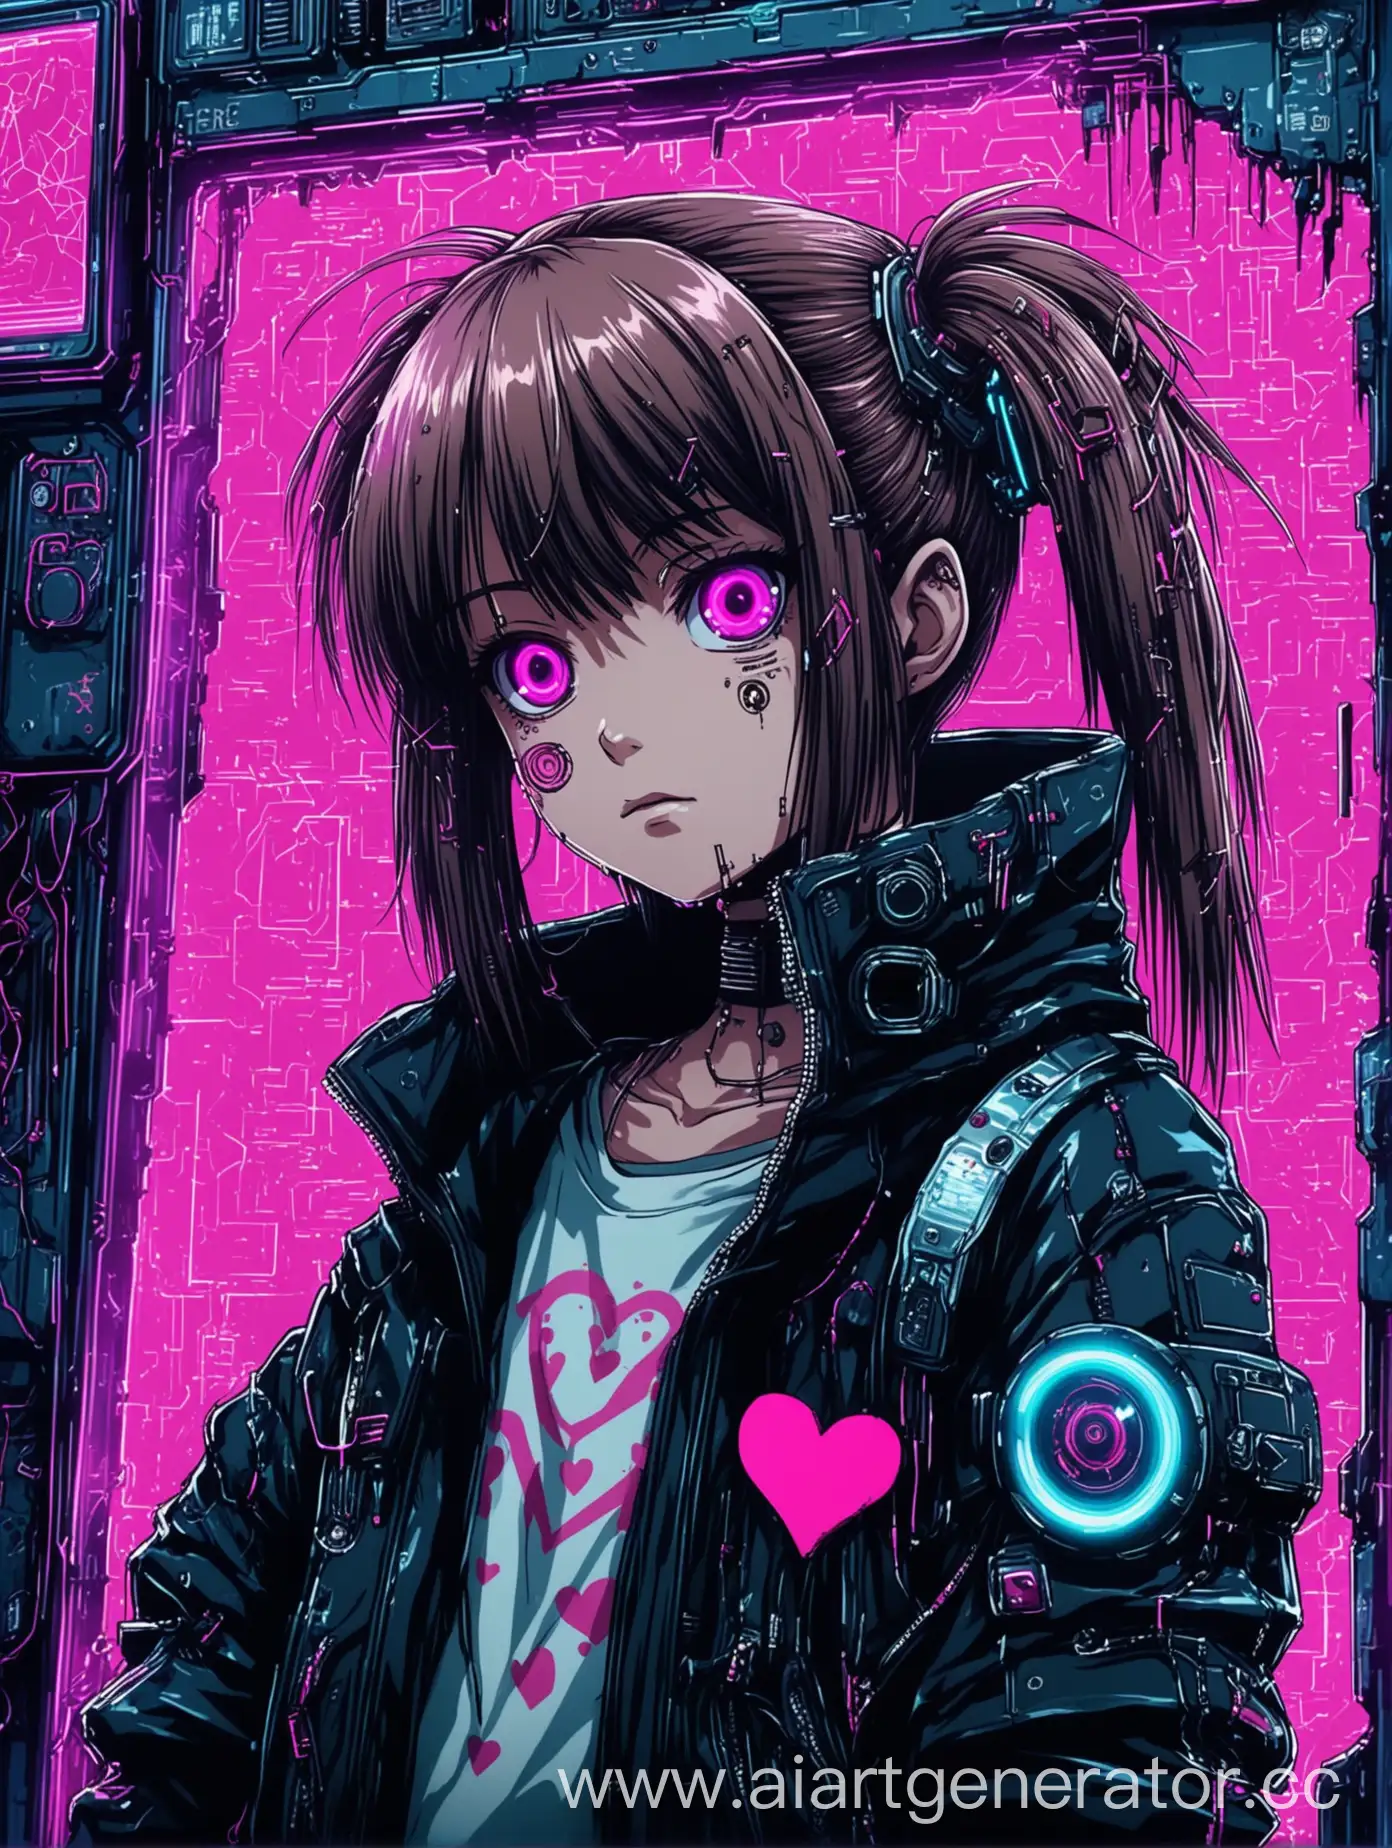 decorate this image as a cyber punk poster for an anime film about a teenage girl with a broken heart